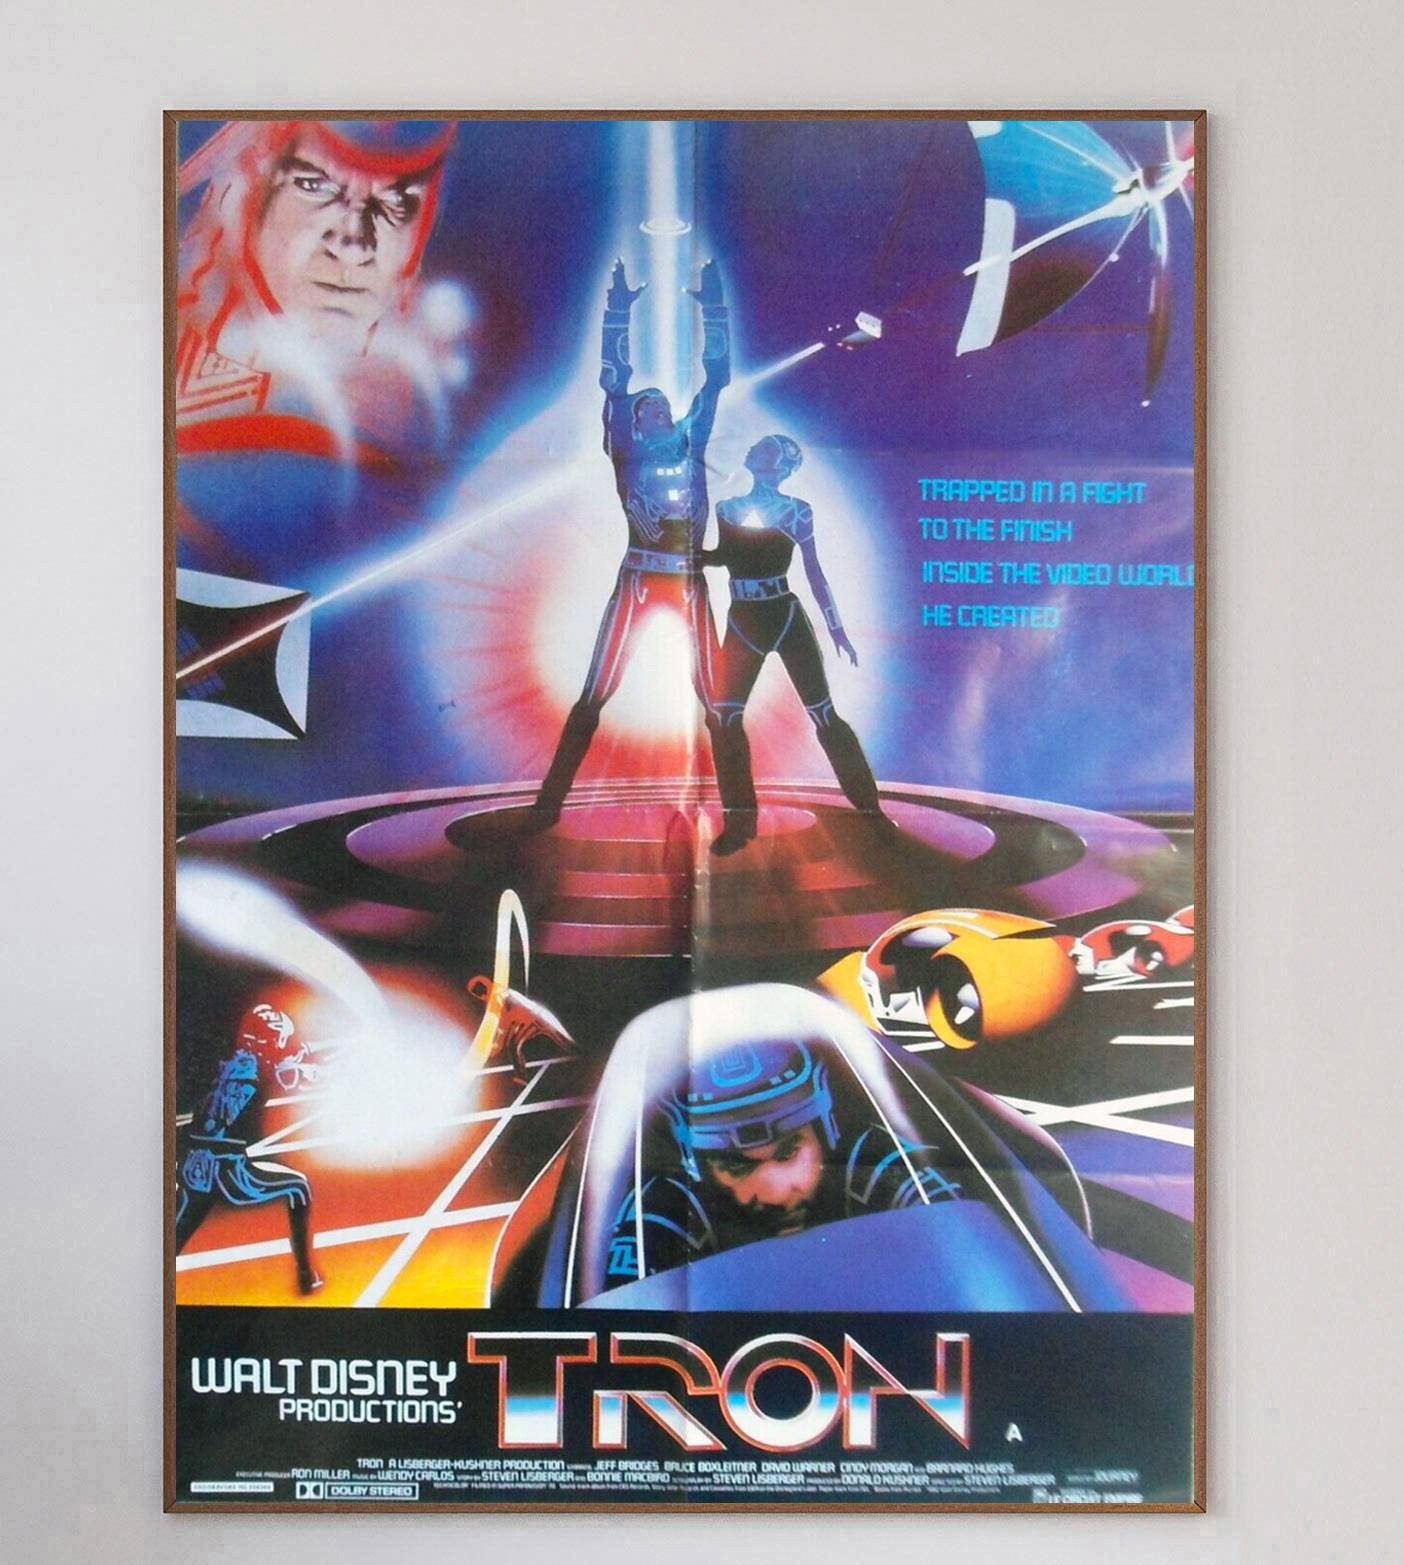 Tron is a 1982 American science fiction action-adventure film written and directed by Steven Lisberger from a story by Lisberger and Bonnie MacBird. The film stars Jeff Bridges as a computer programmer who is transported inside the software world of